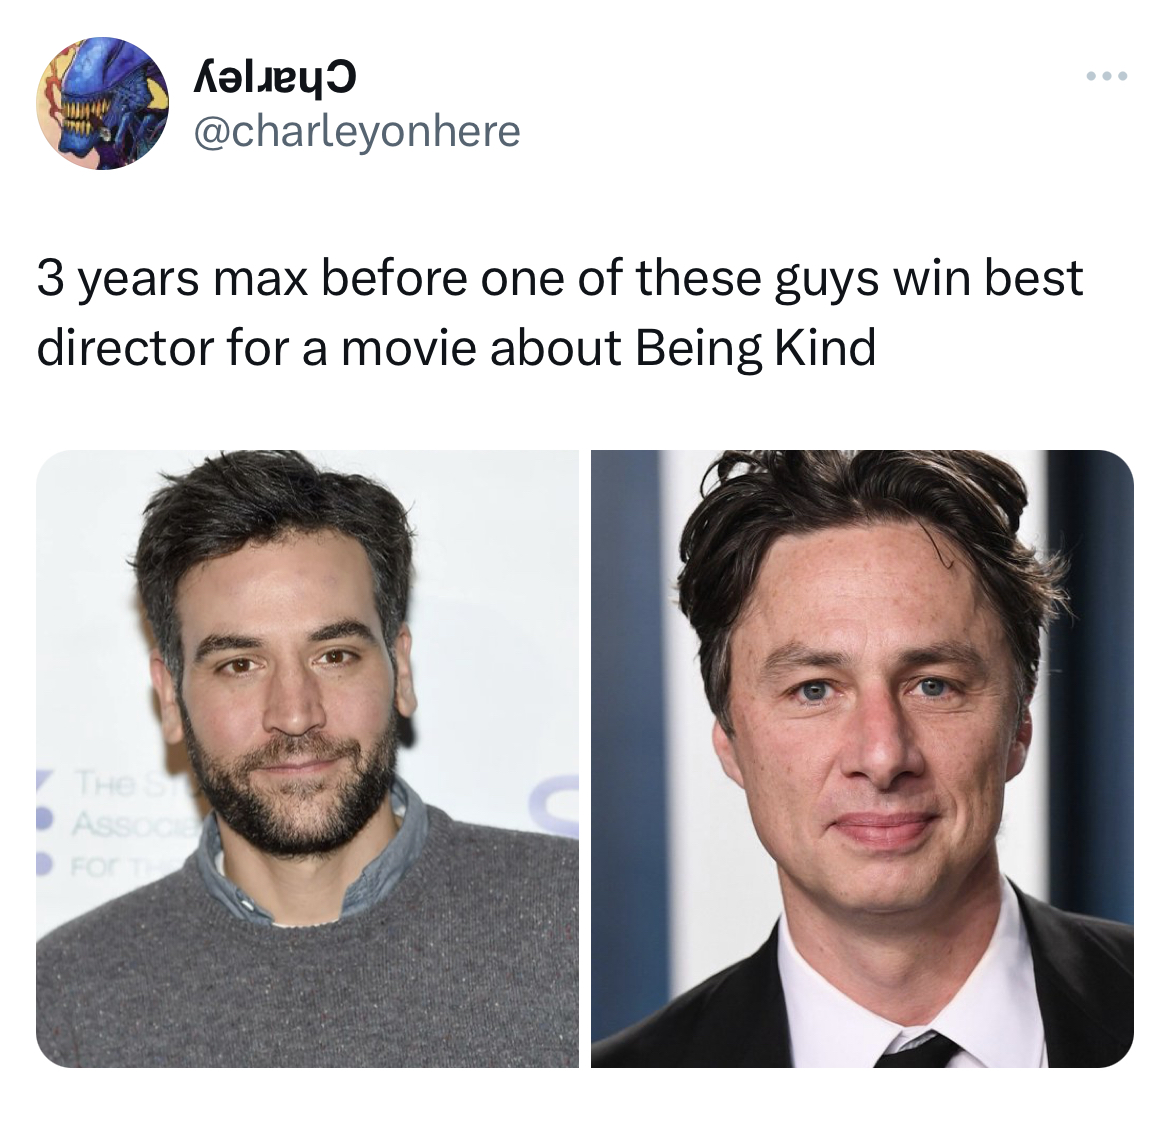 savage tweets - communication - 3 years max before one of these guys win best director for a movie about Being Kind For www